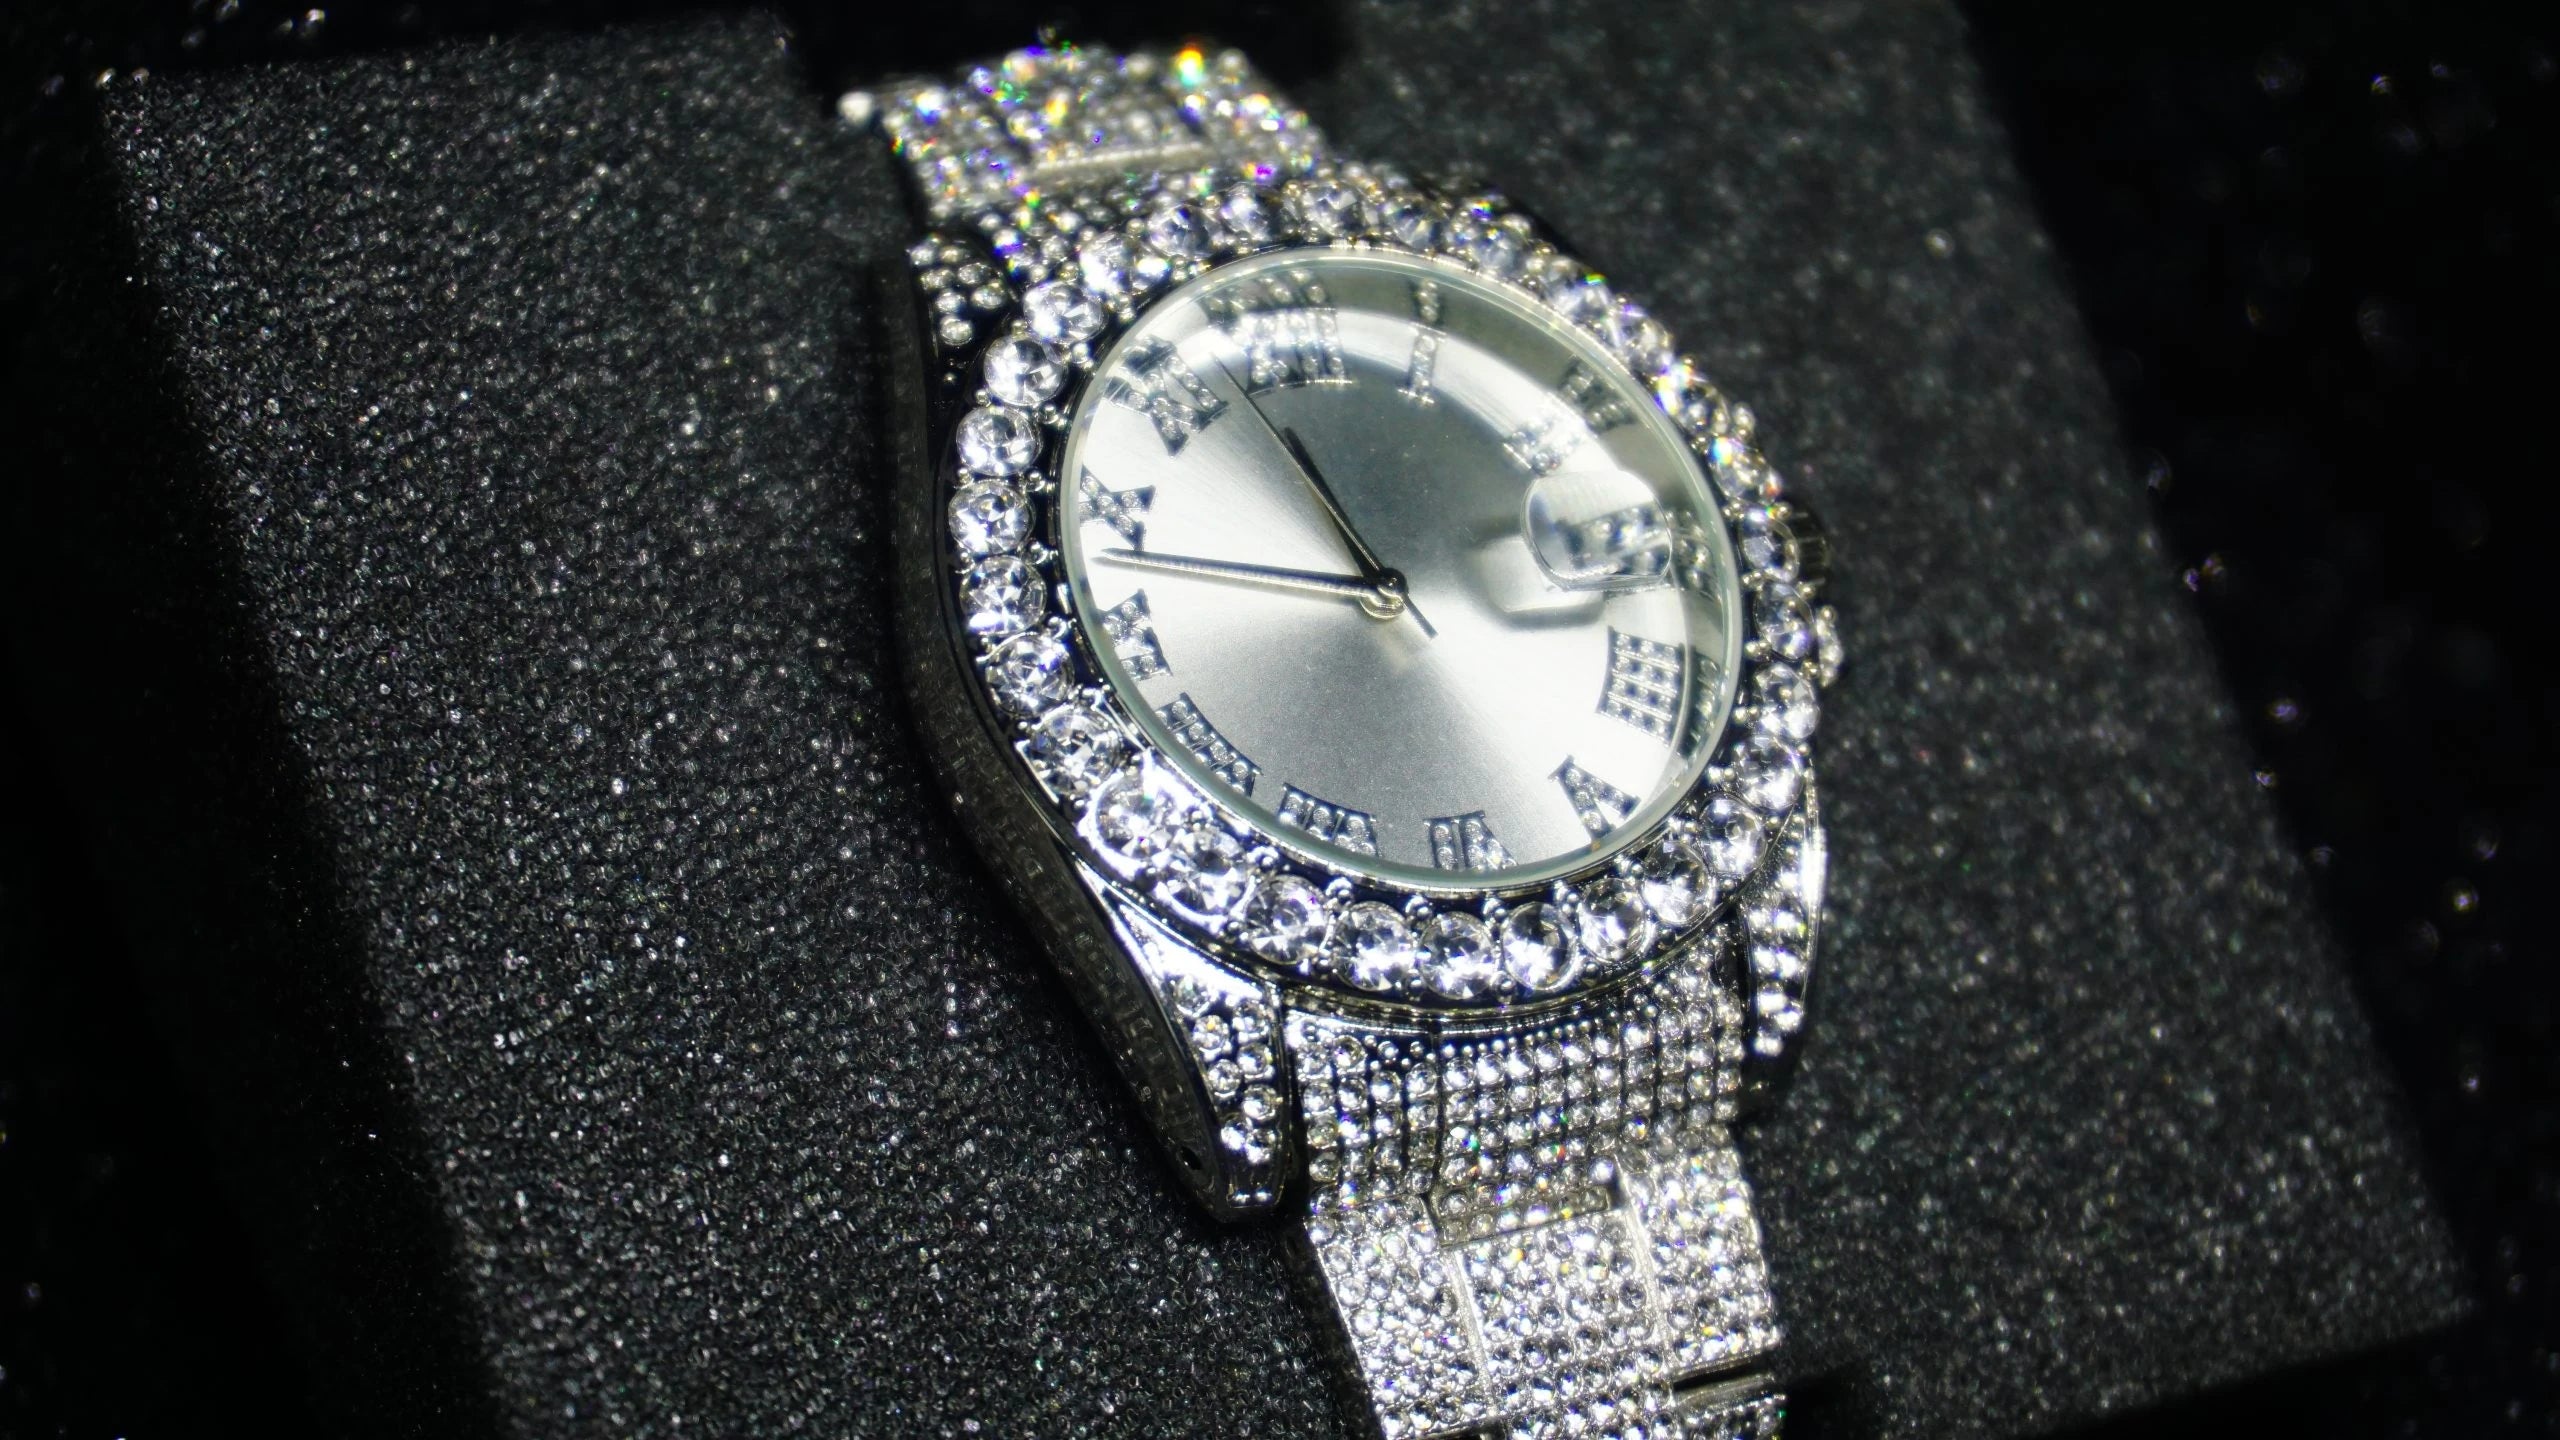 Full Silver Iced Out Watch Saat